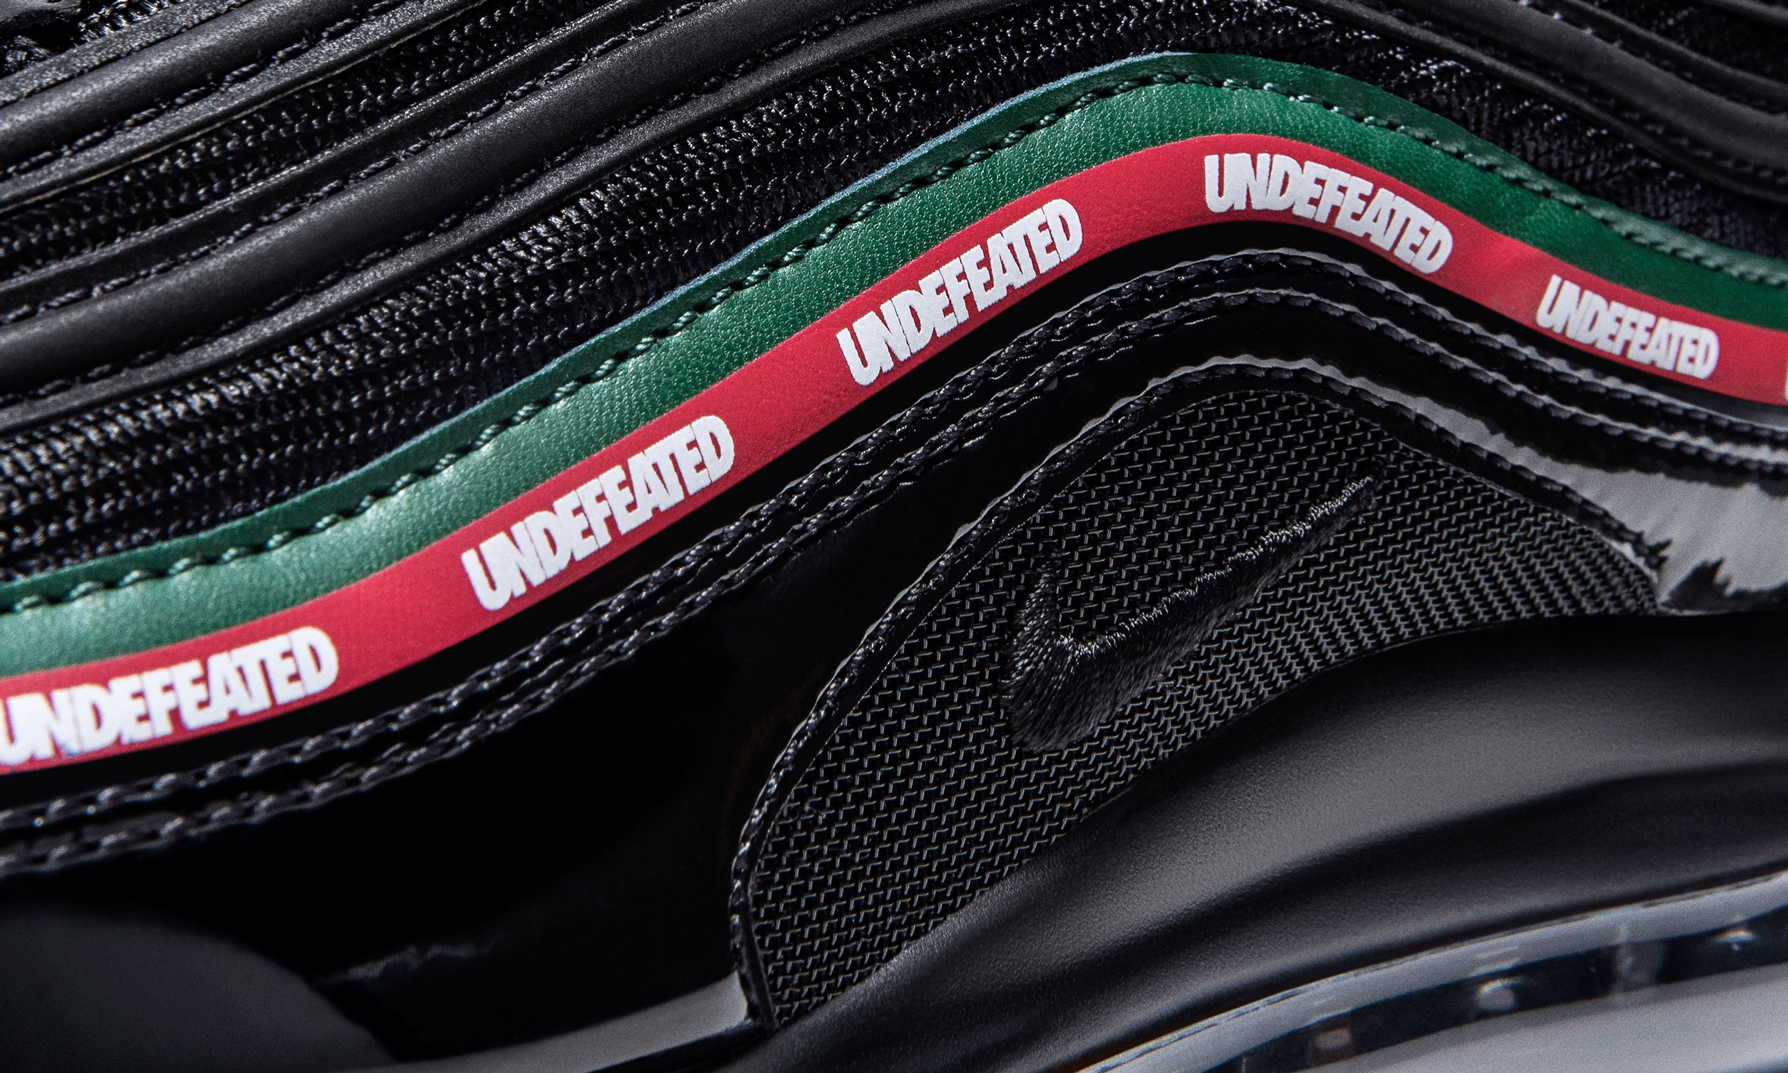 UNDEFEATED x Nike Air Max 97 配件系列全览